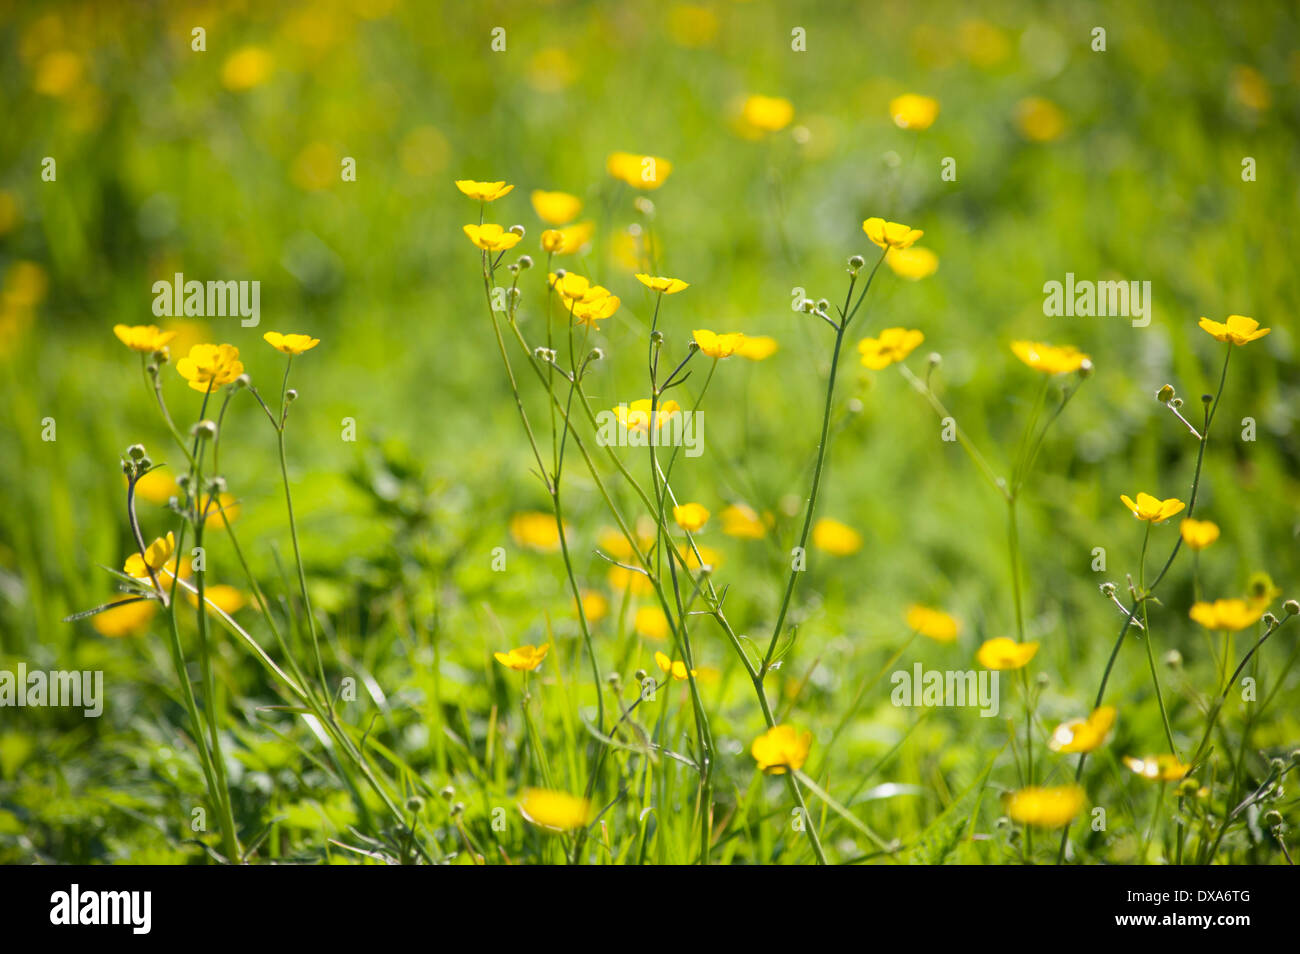 Buttercup, Meadow buttercup, Ranunculus acris growing in a grass meadow, several stems in sunlight. Stock Photo